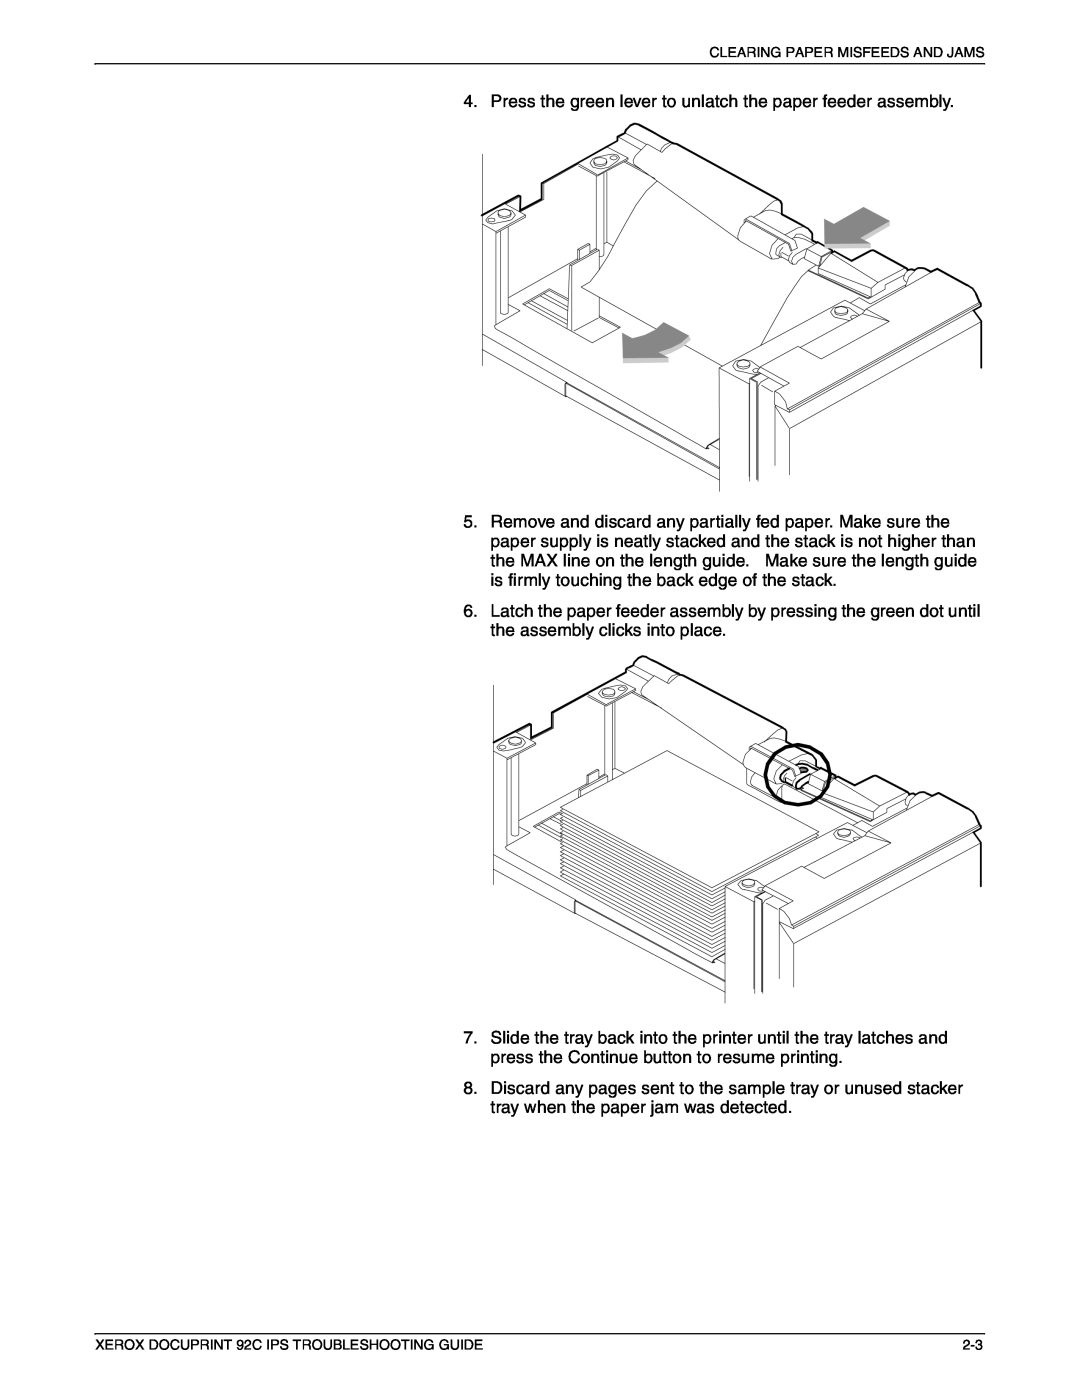 Xerox 92C IPS manual Press the green lever to unlatch the paper feeder assembly 